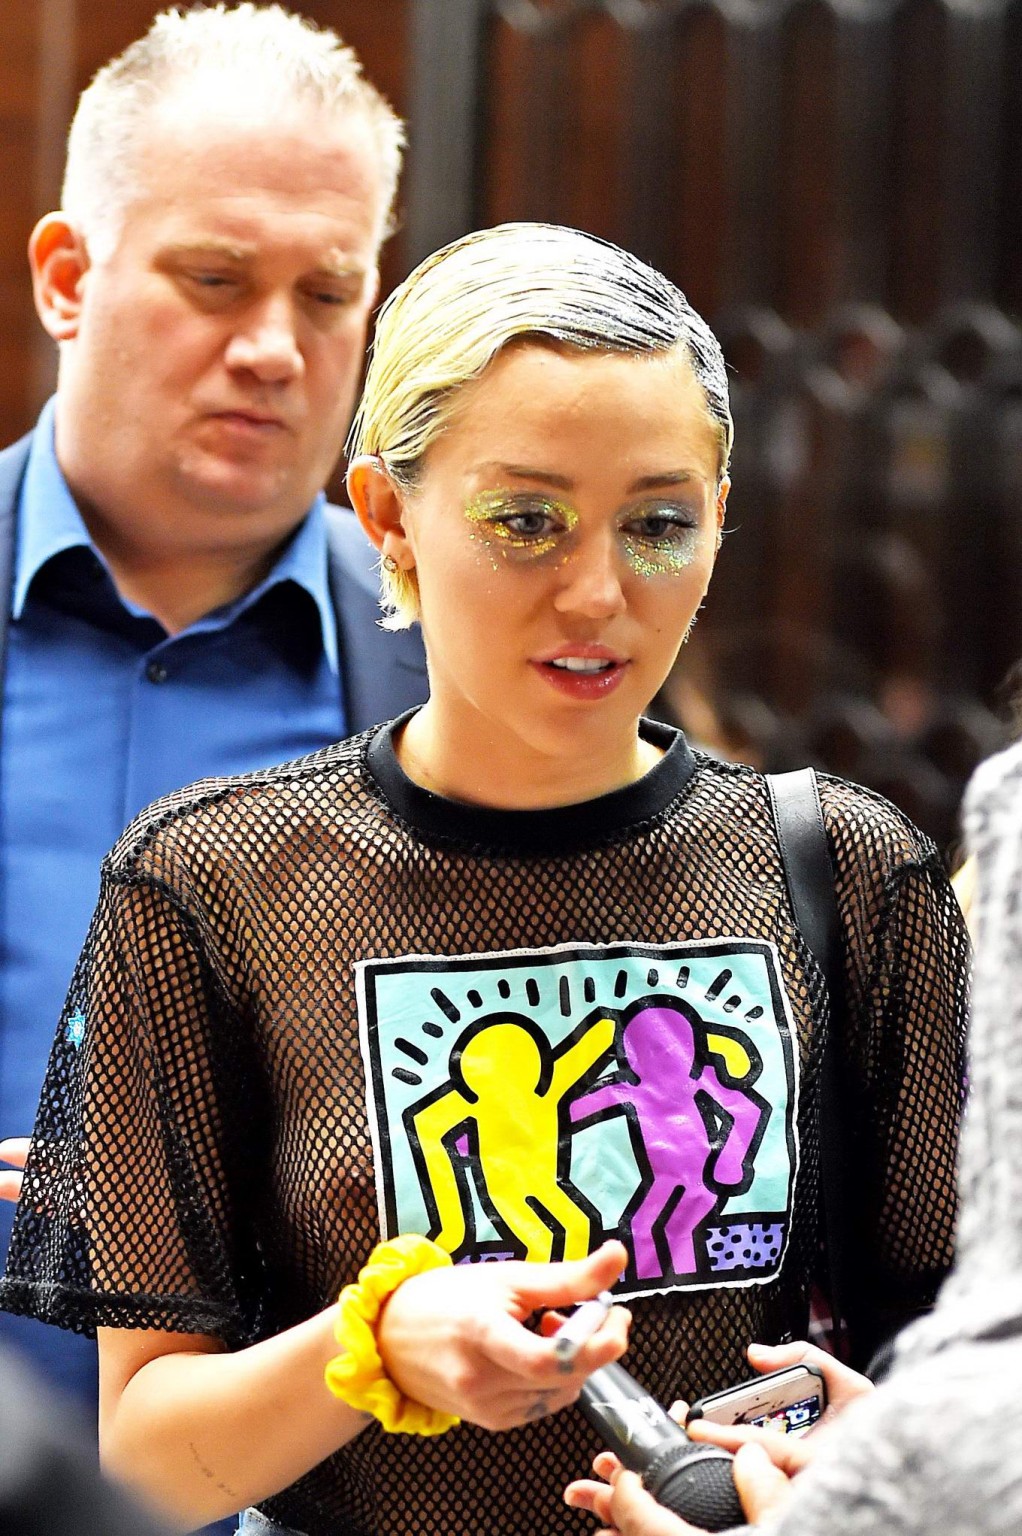 Miley Cyrus shows off her boobs wearing a mesh Tshirt out in NYC #75164259